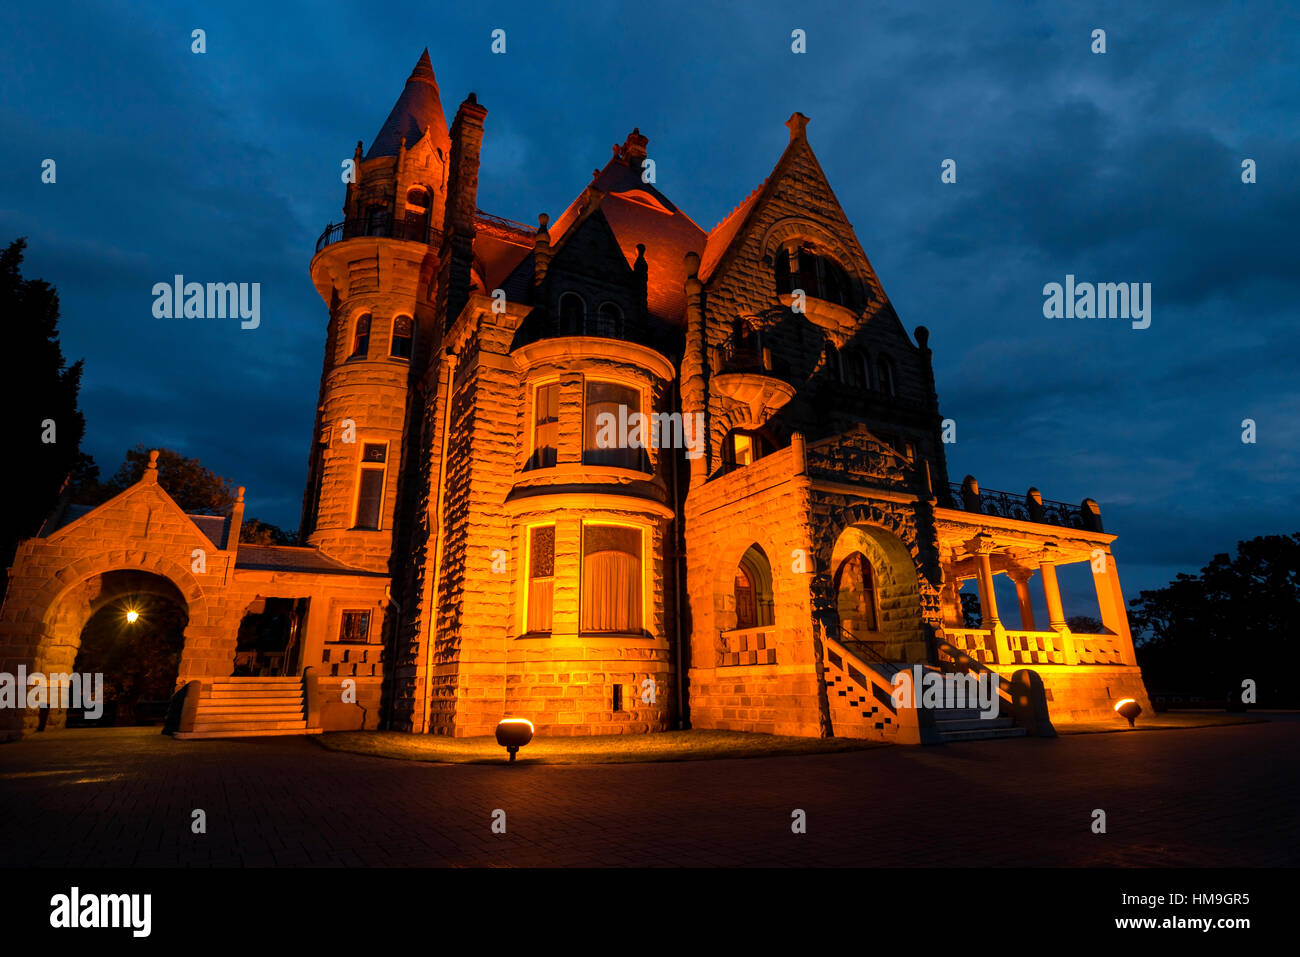 Canada National Historic Building in Vancouver Island - Night of craigdarroch castle 1. Stock Photo